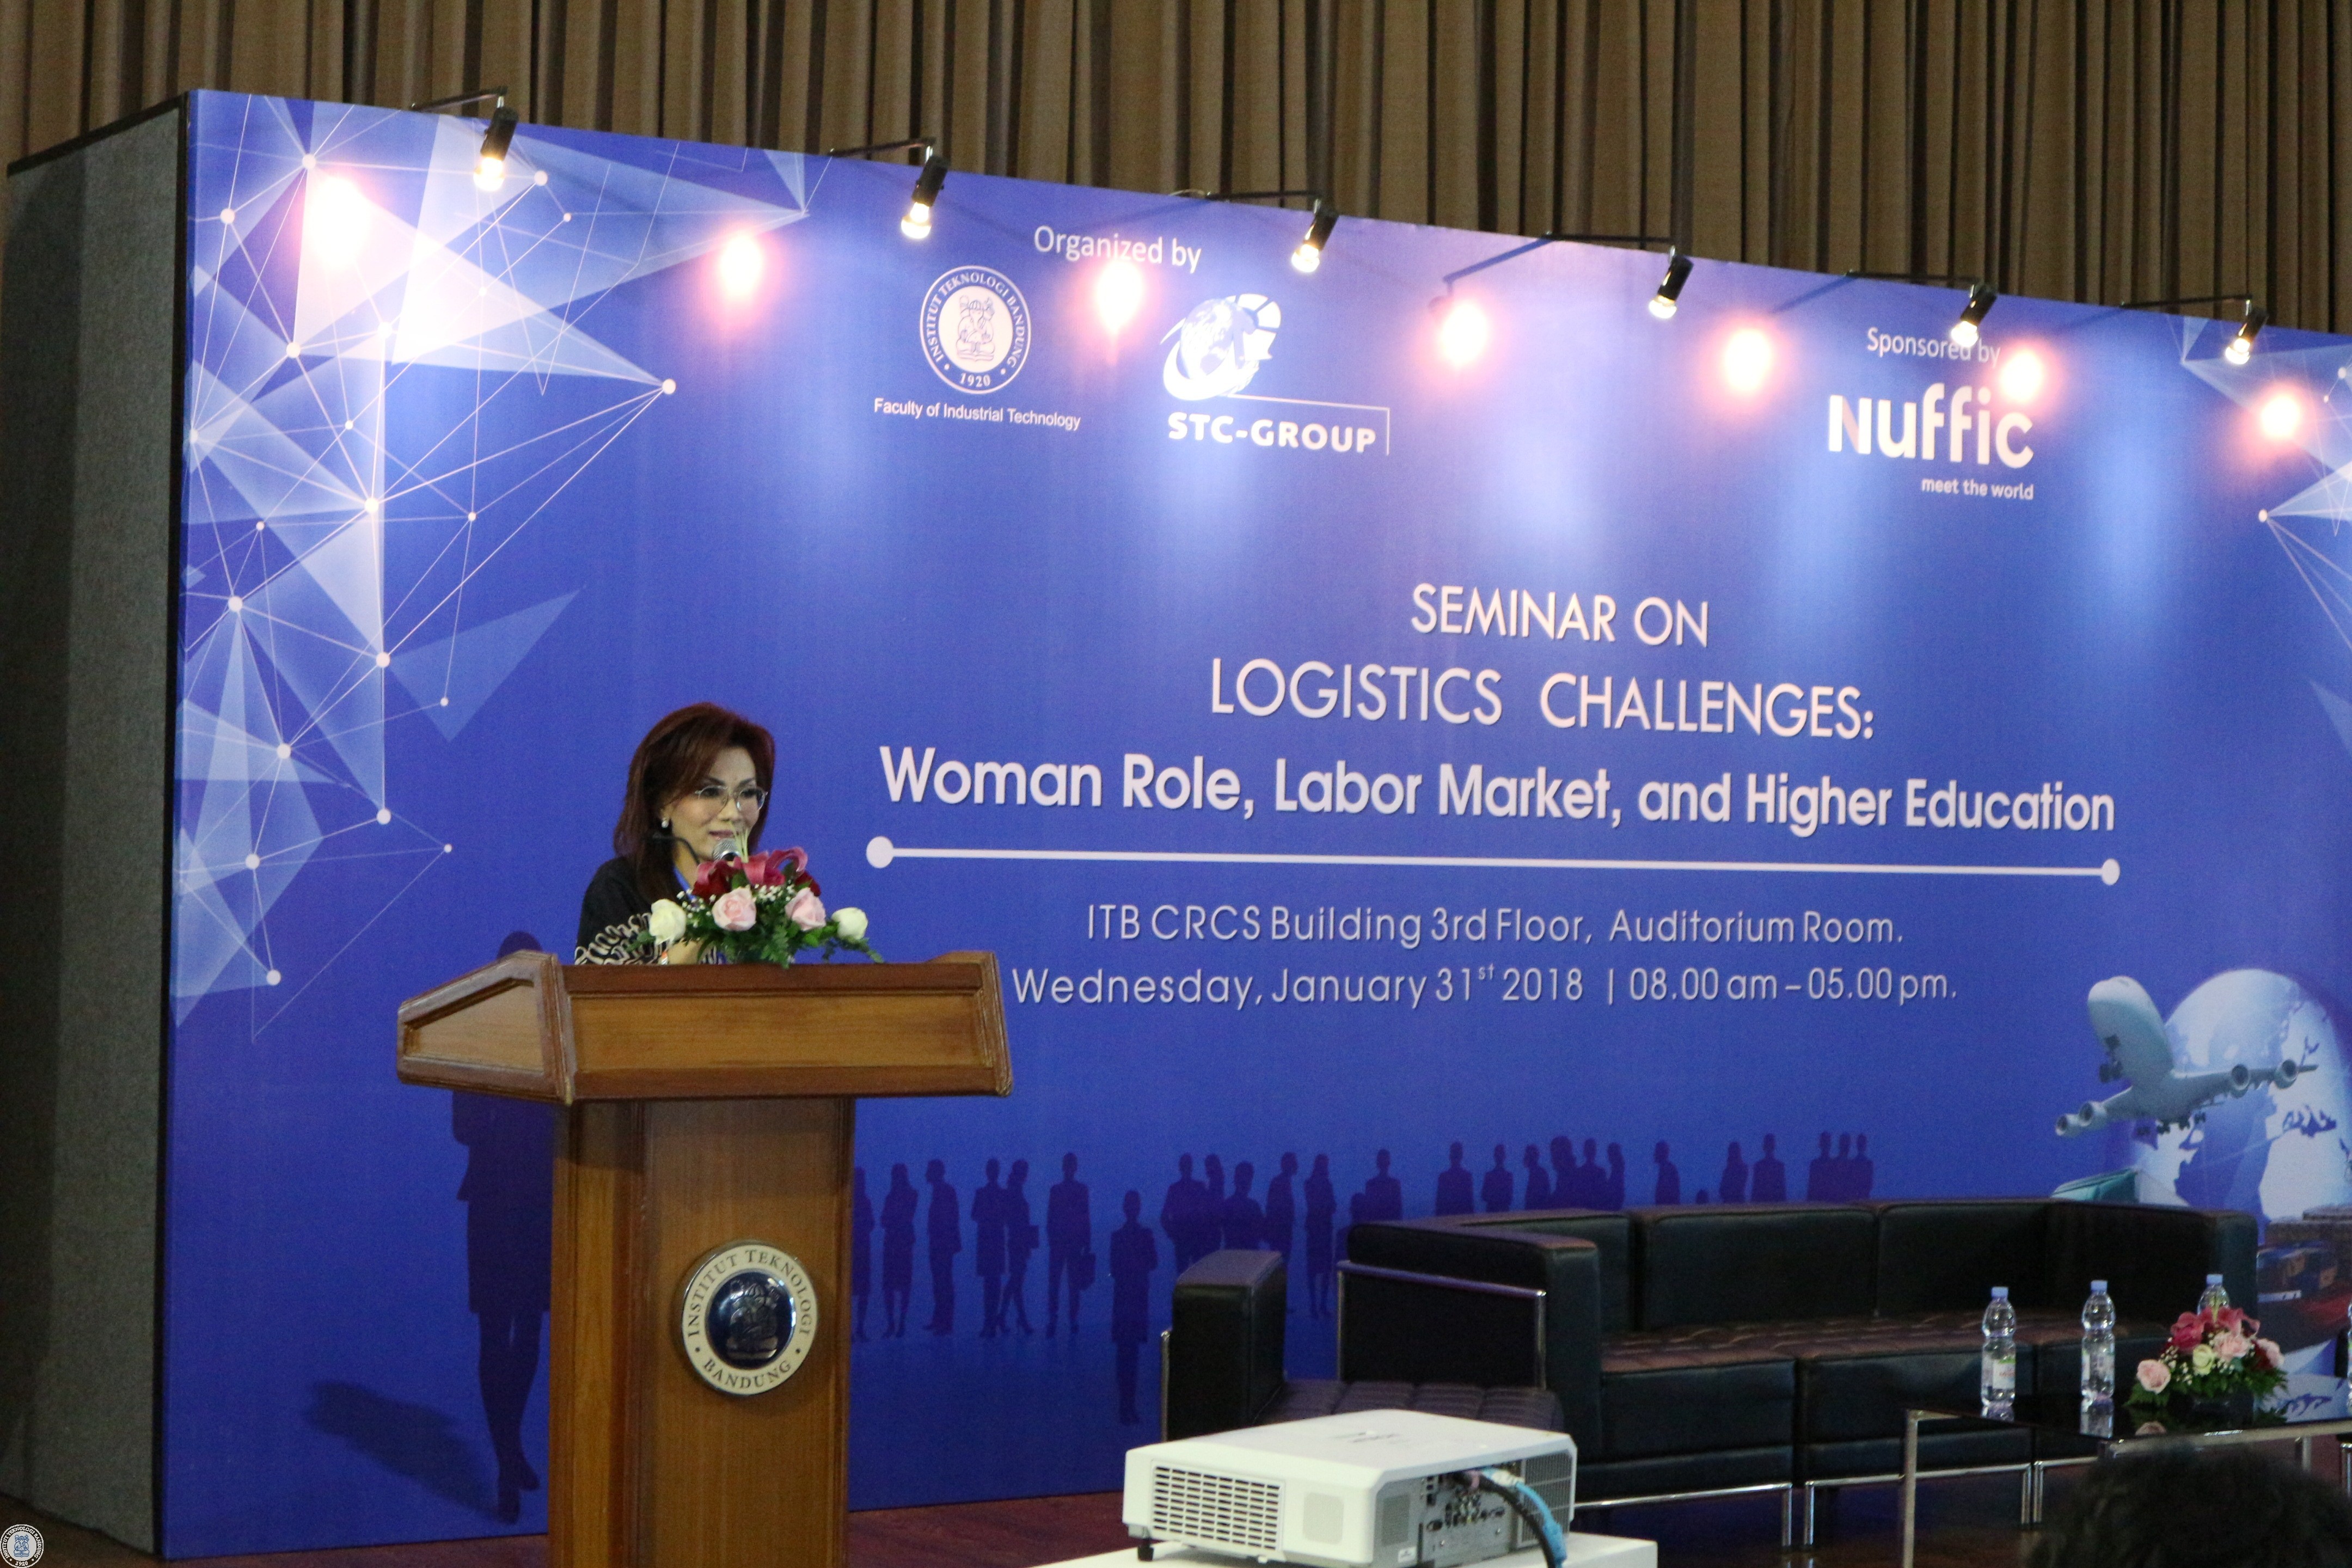 seminar-on-logistics-challenges-woman-role-labor-market-and-higher-education